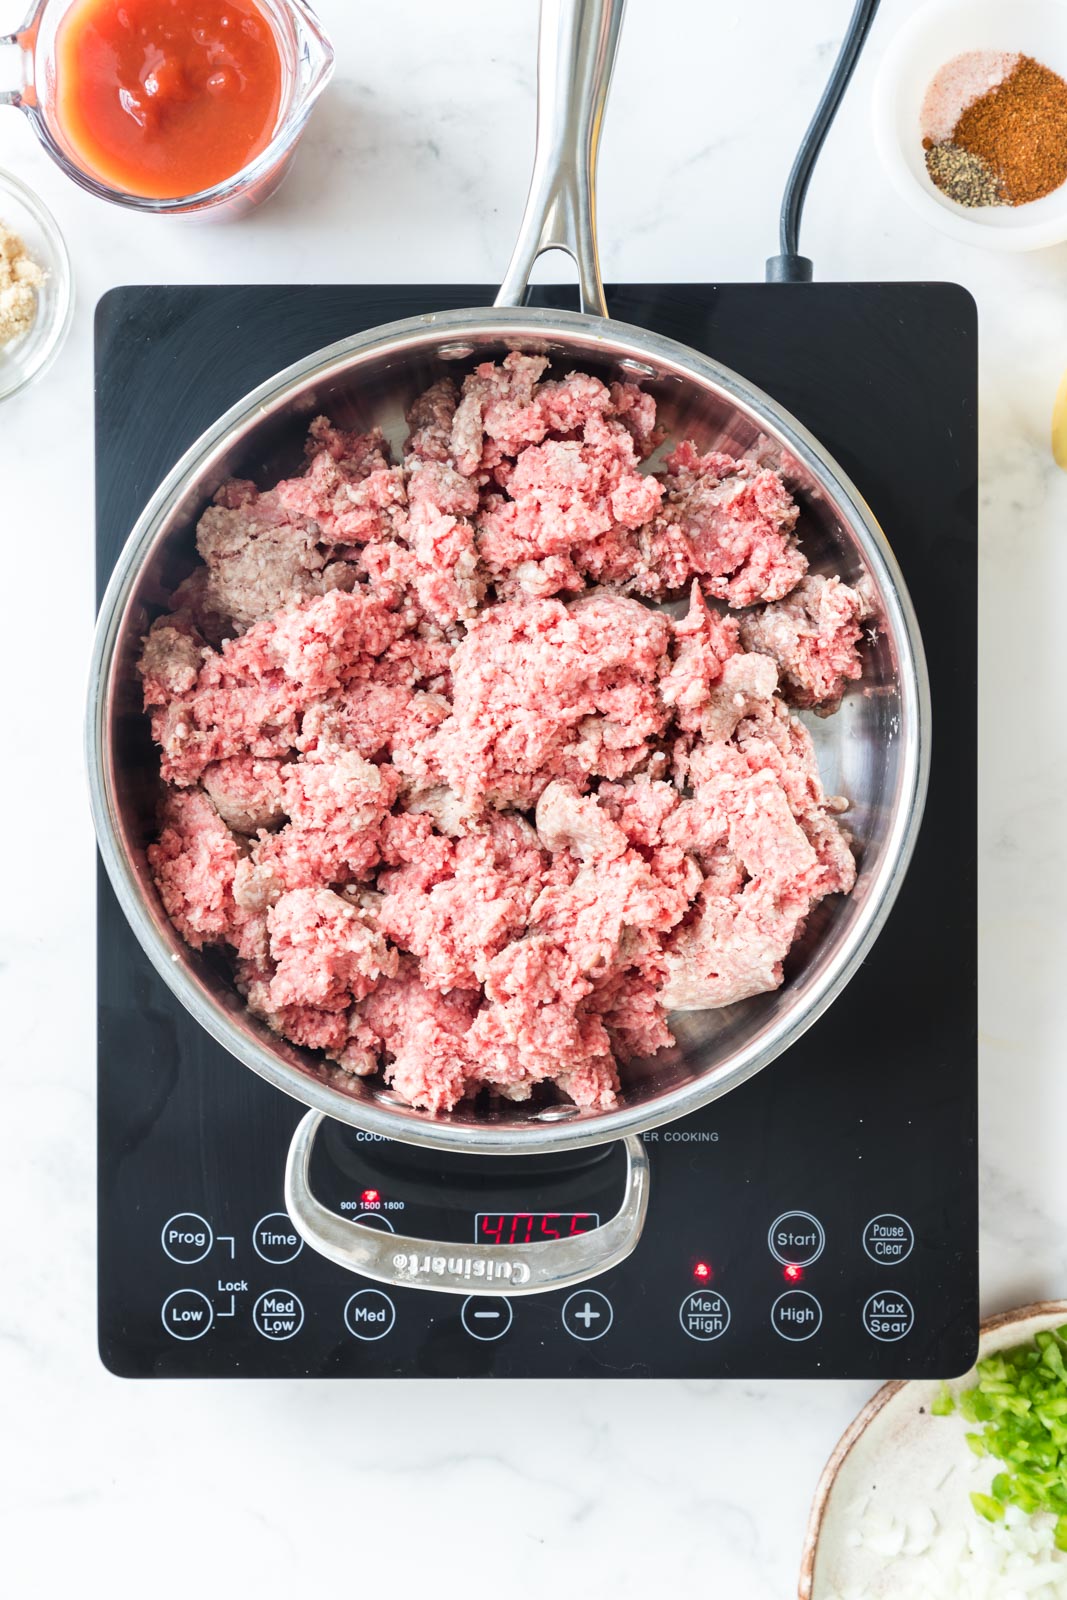 a skillet of uncooked ground beef in a skillet